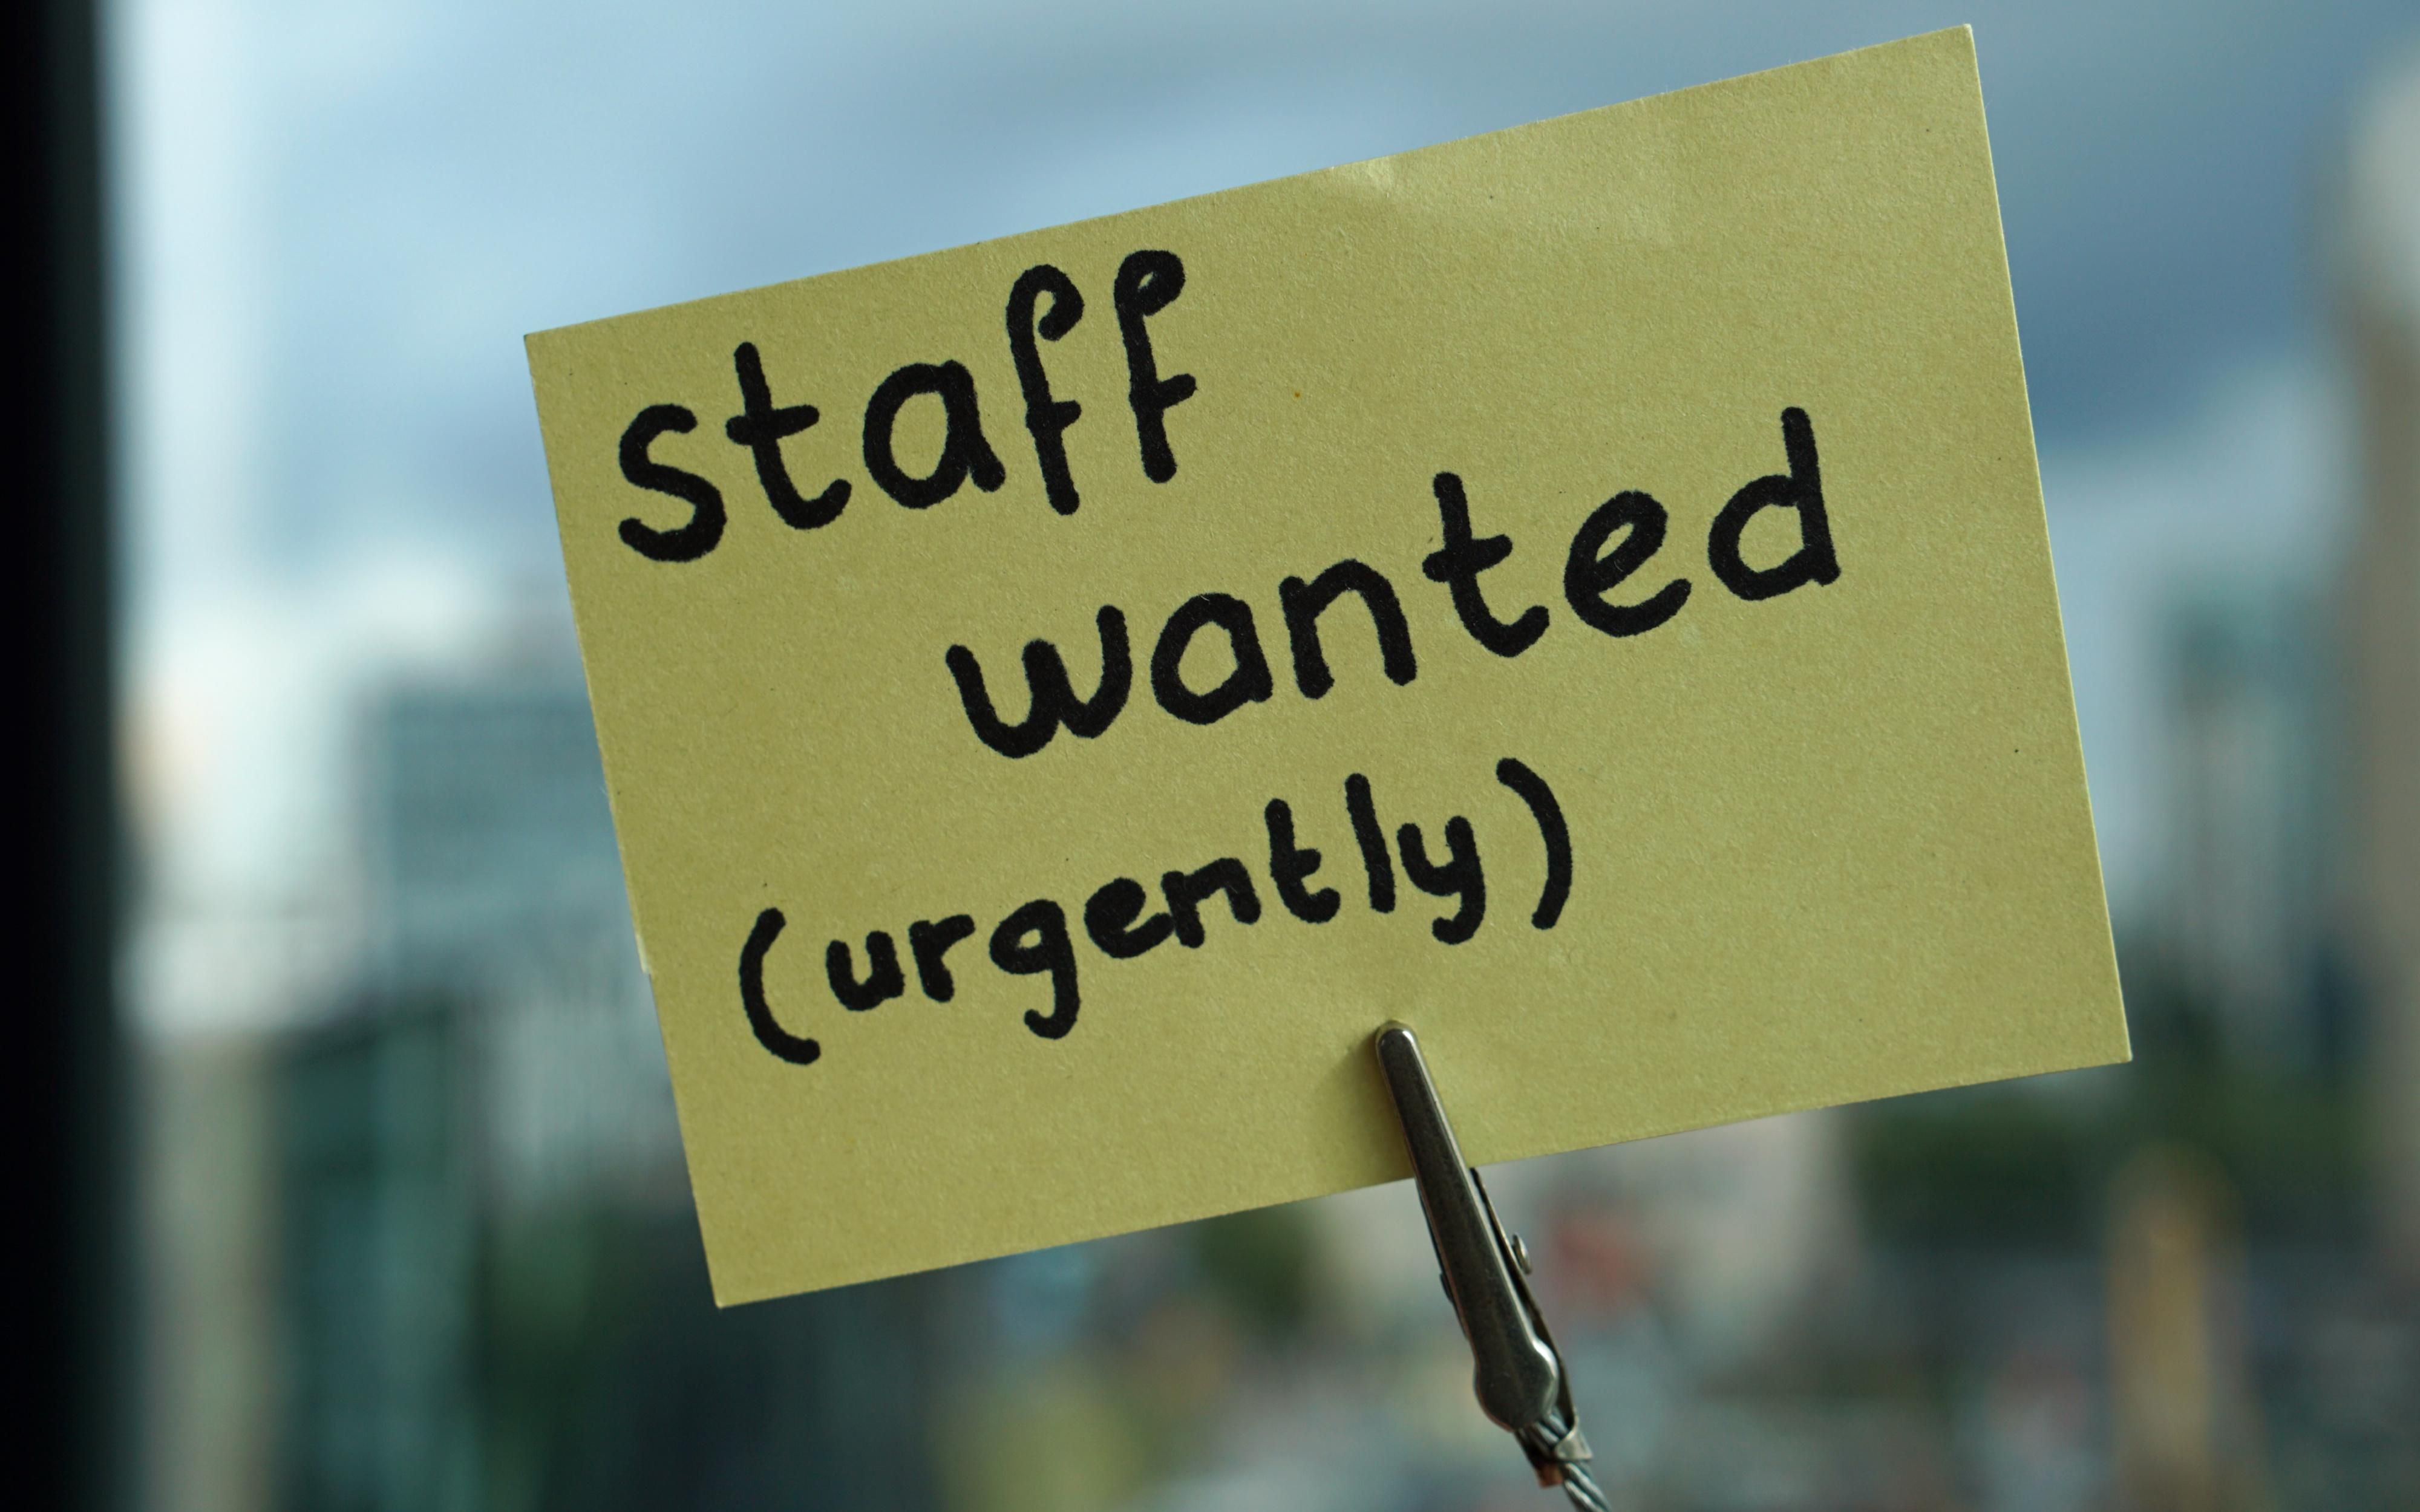 A staff wanted sign